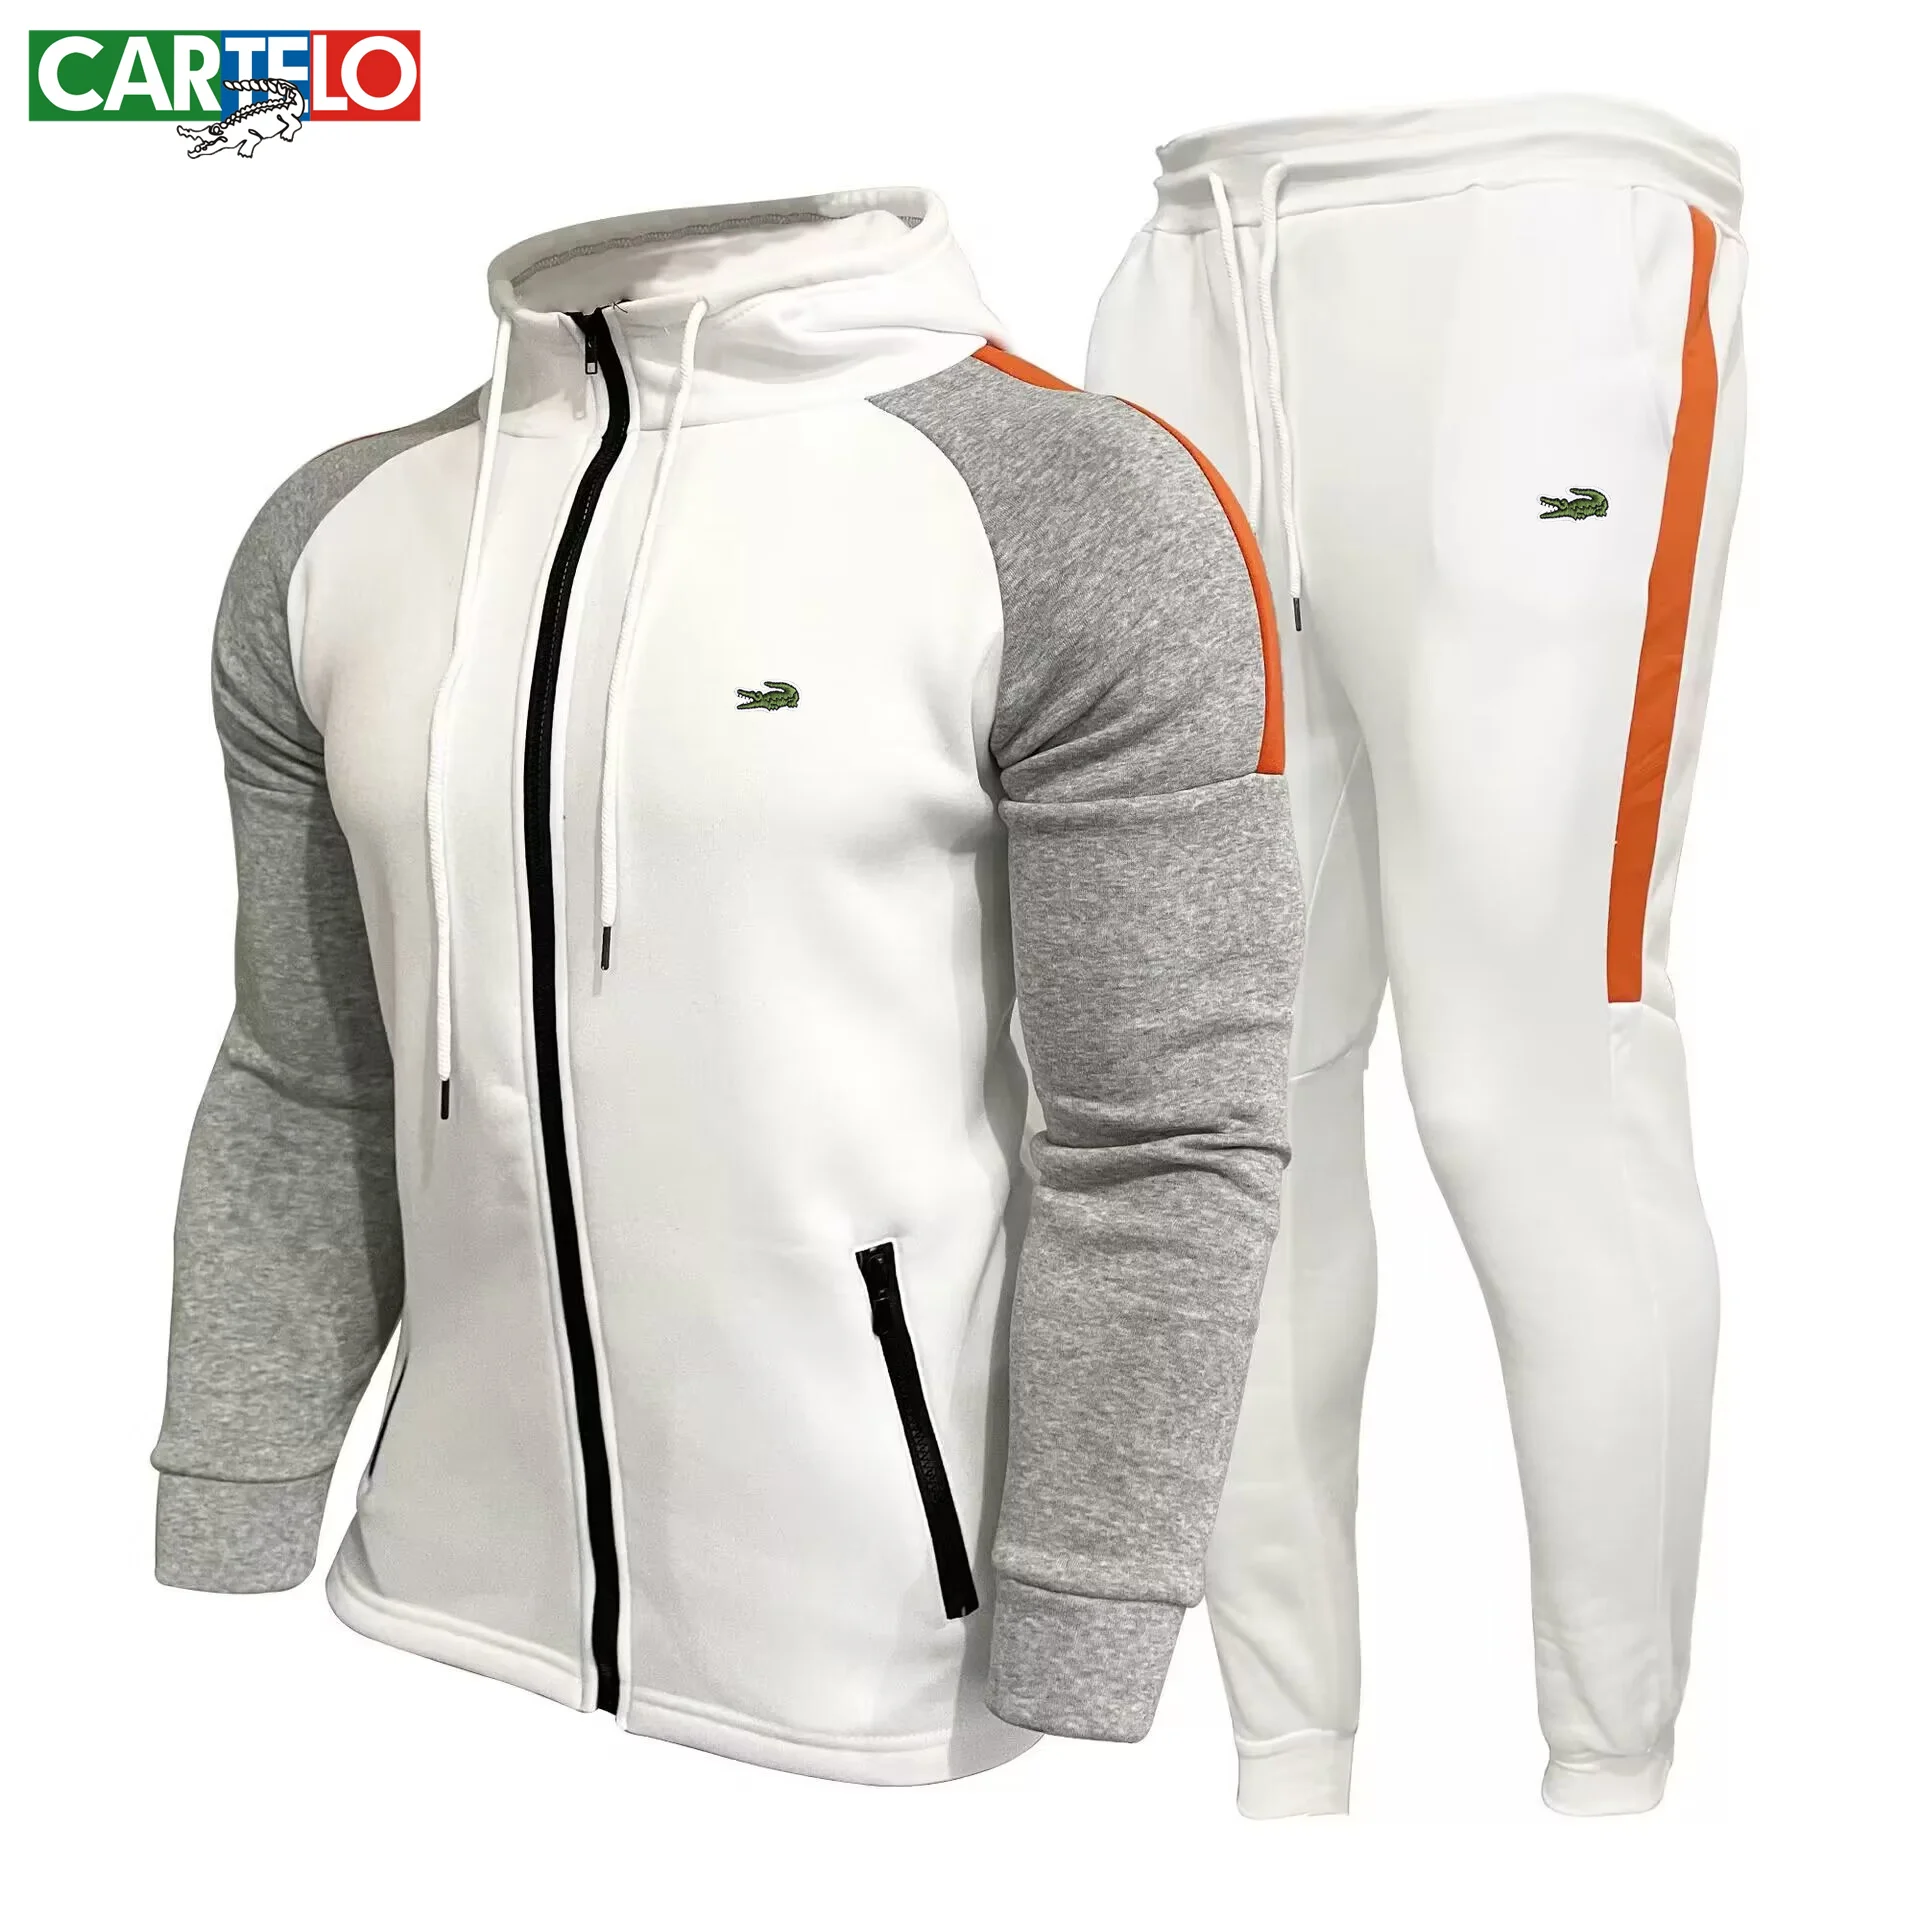 CARTELO Spring and Autumn Fashion Men's Embroidery Hoodie Set Casual Sweater Panel Tops Pants Sportswear High Quality Clothes